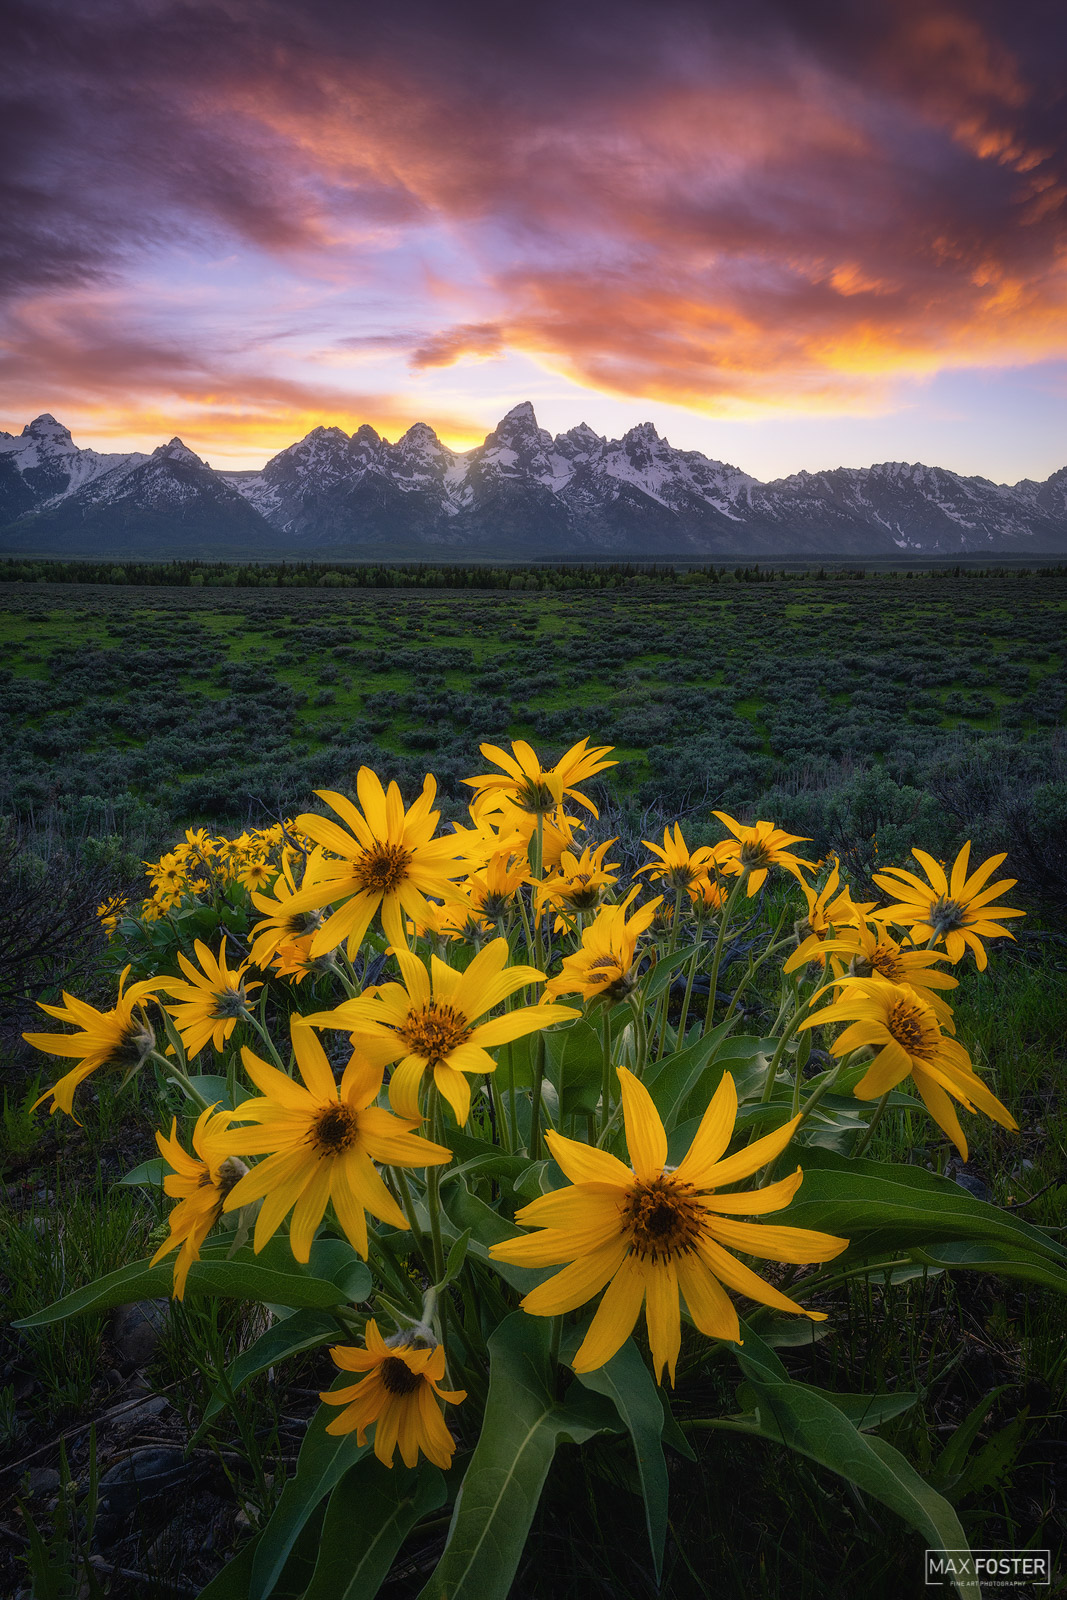 Elevate your space with Renewal, Max Foster's limited edition photography print of Balsamroot wildflowers in Grand Teton National...